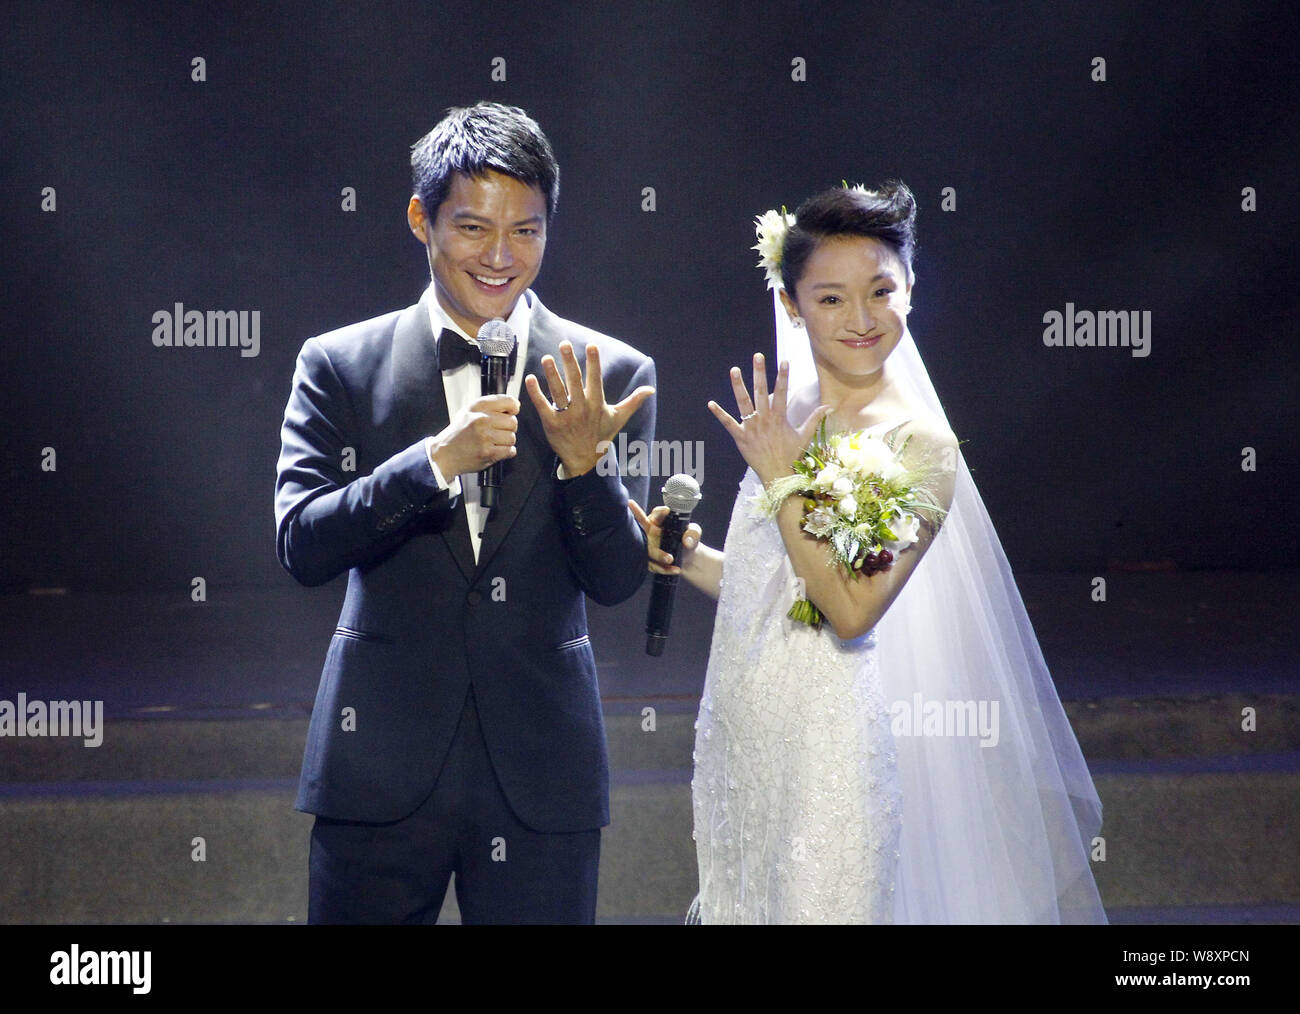 American actor Archie Kao, left, and Chinese actress Zhou Xun in a white wedding dress show their engagement rings after announcing their wedding duri Stock Photo